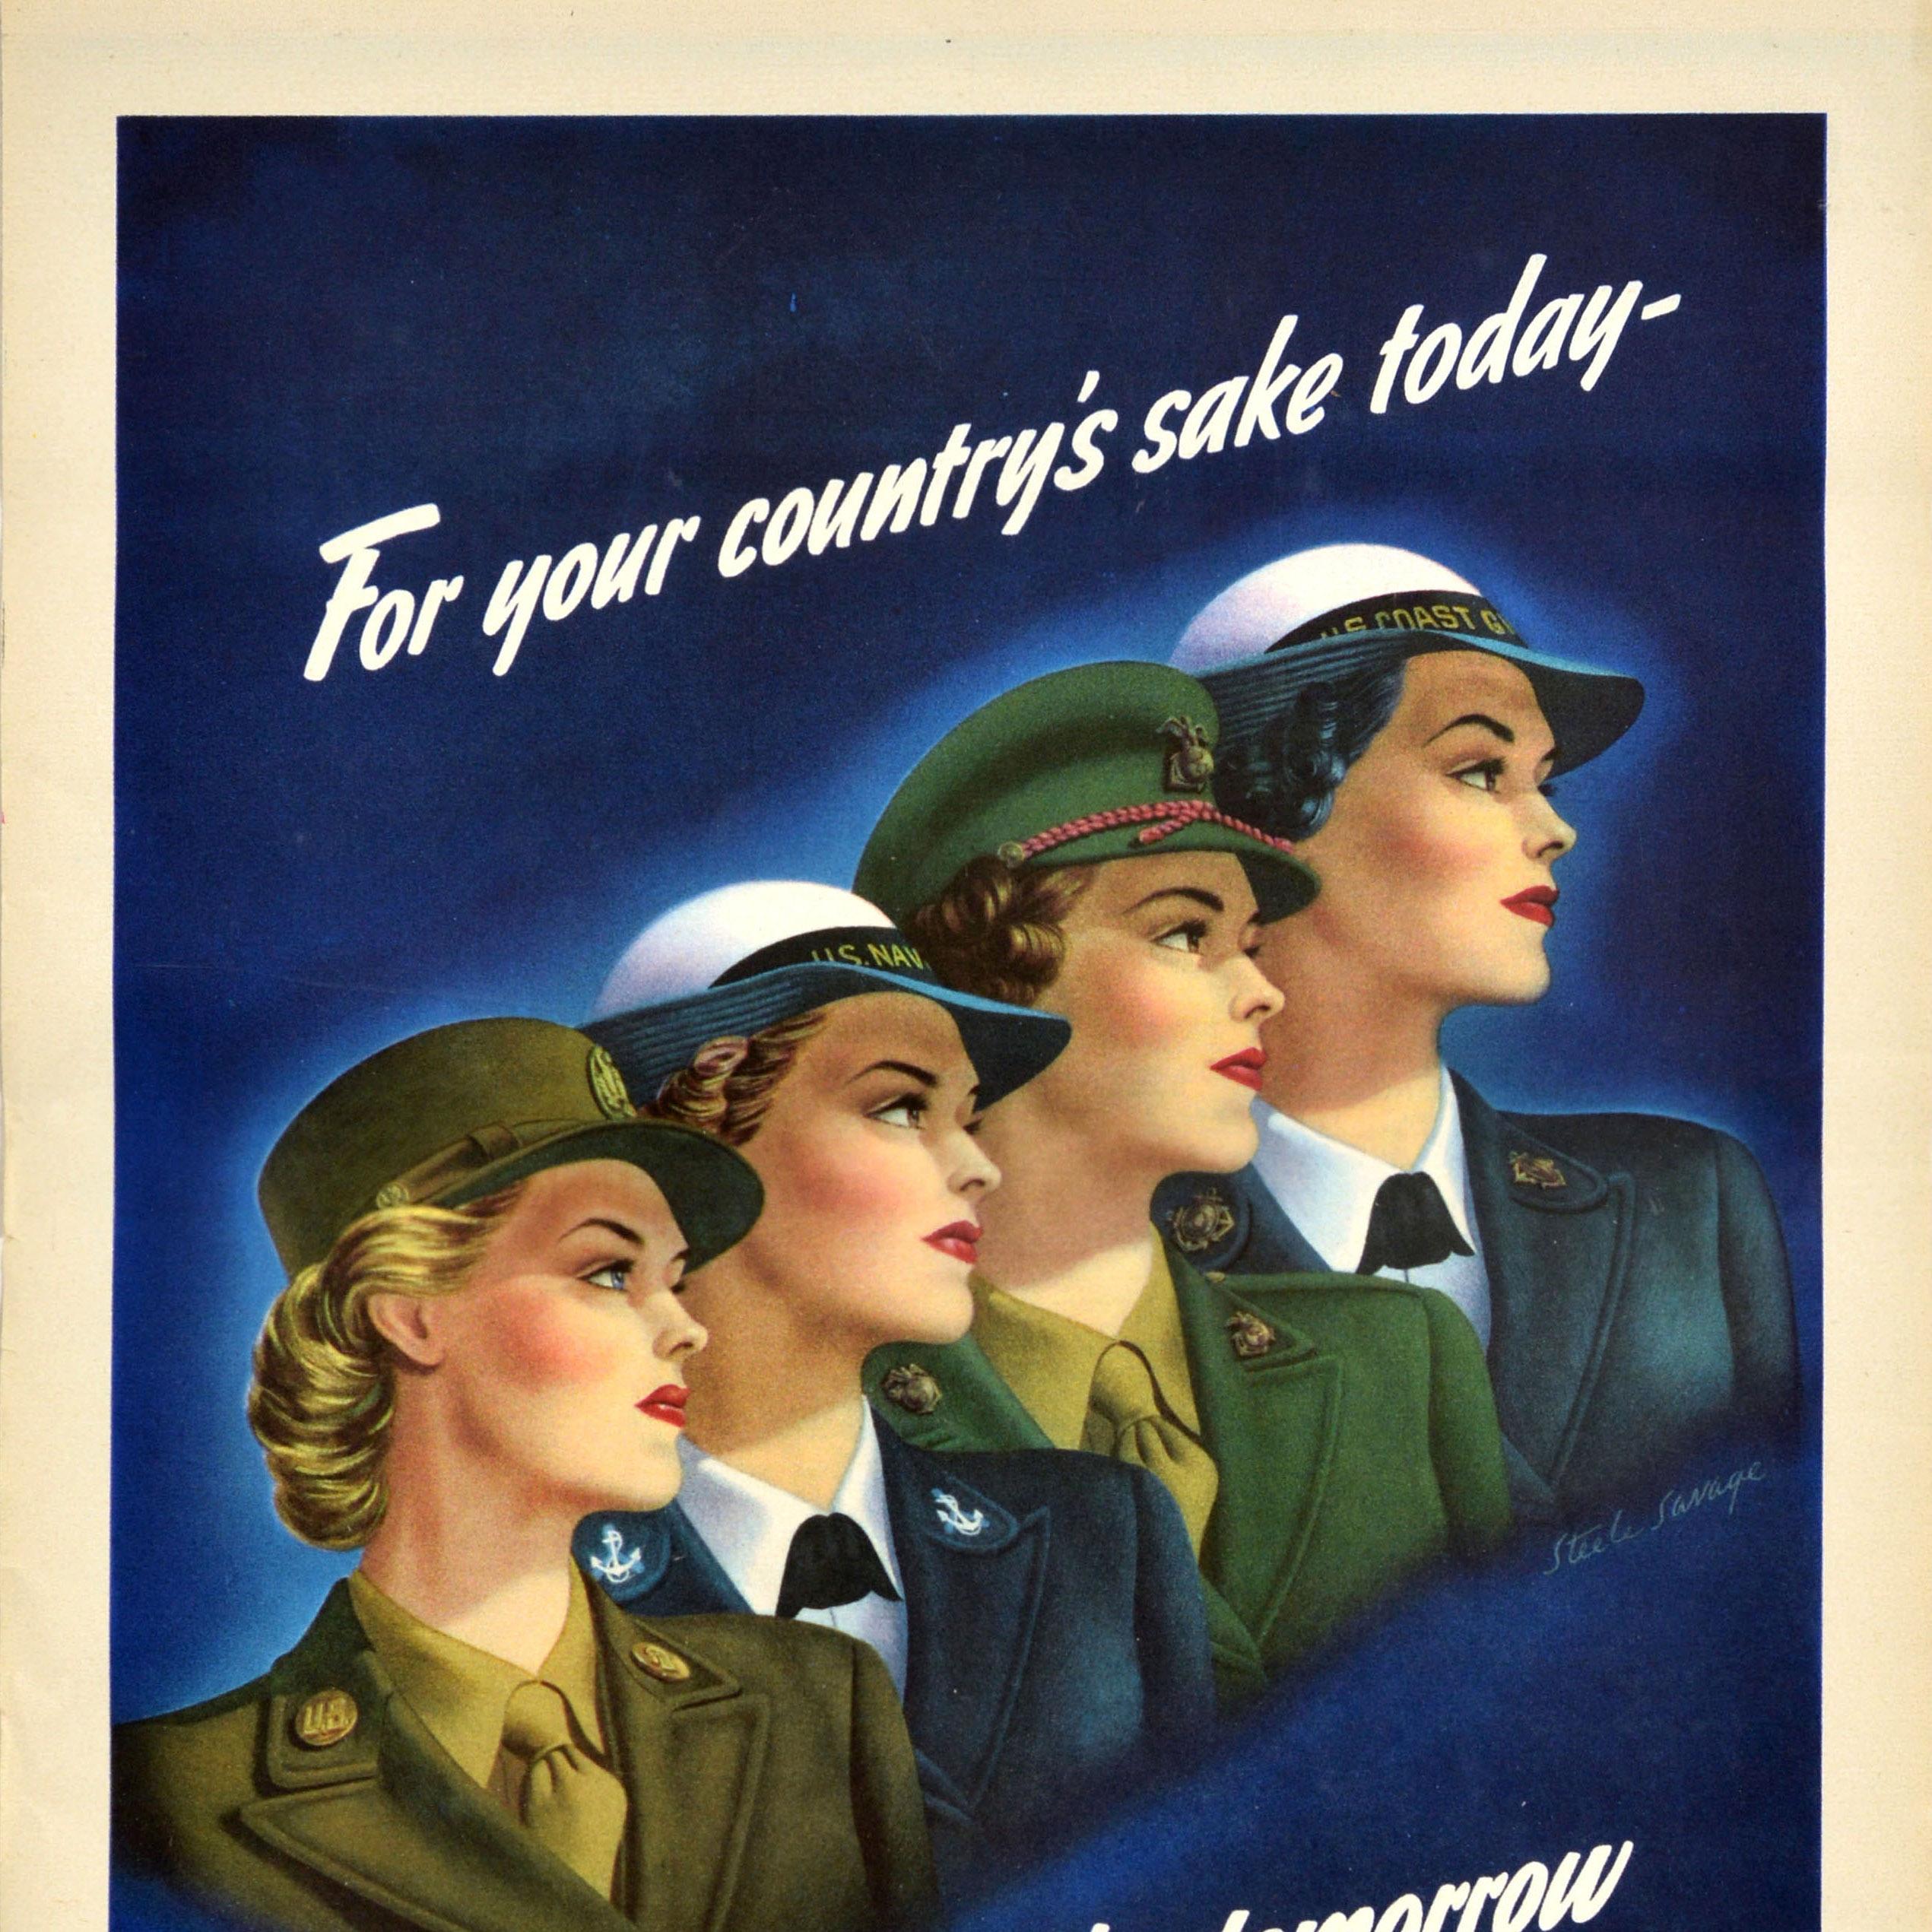 Original Vintage American WWII Recruitment Poster For Your Country's Sake Today - Black Print by Unknown